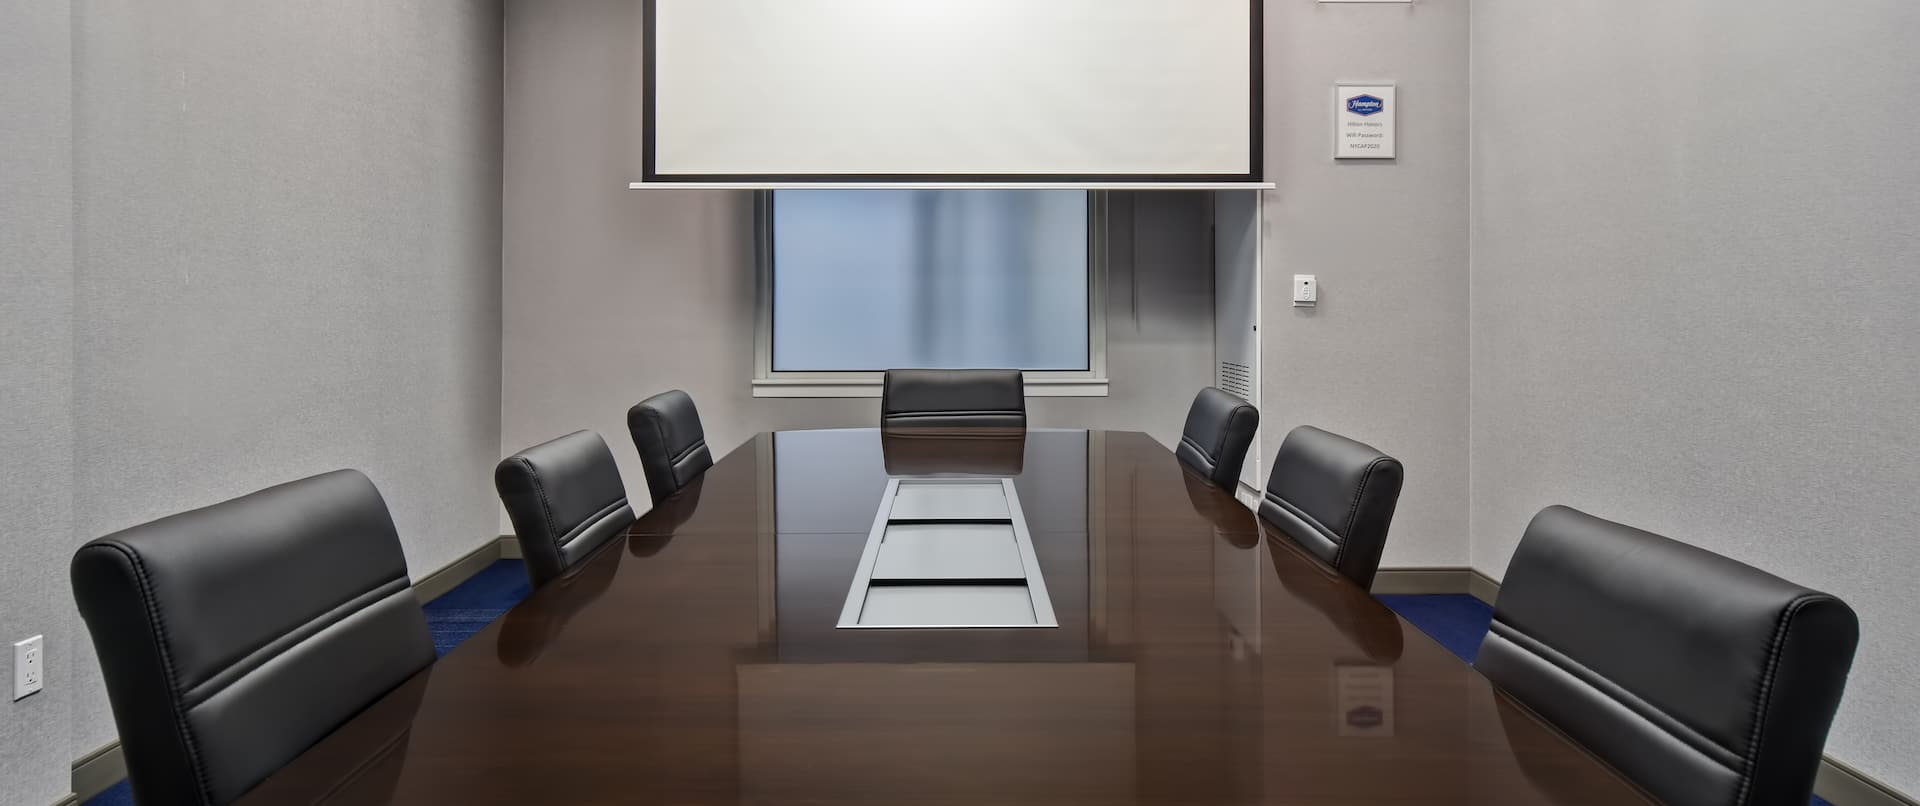 boardroom style meeting space with projection screen